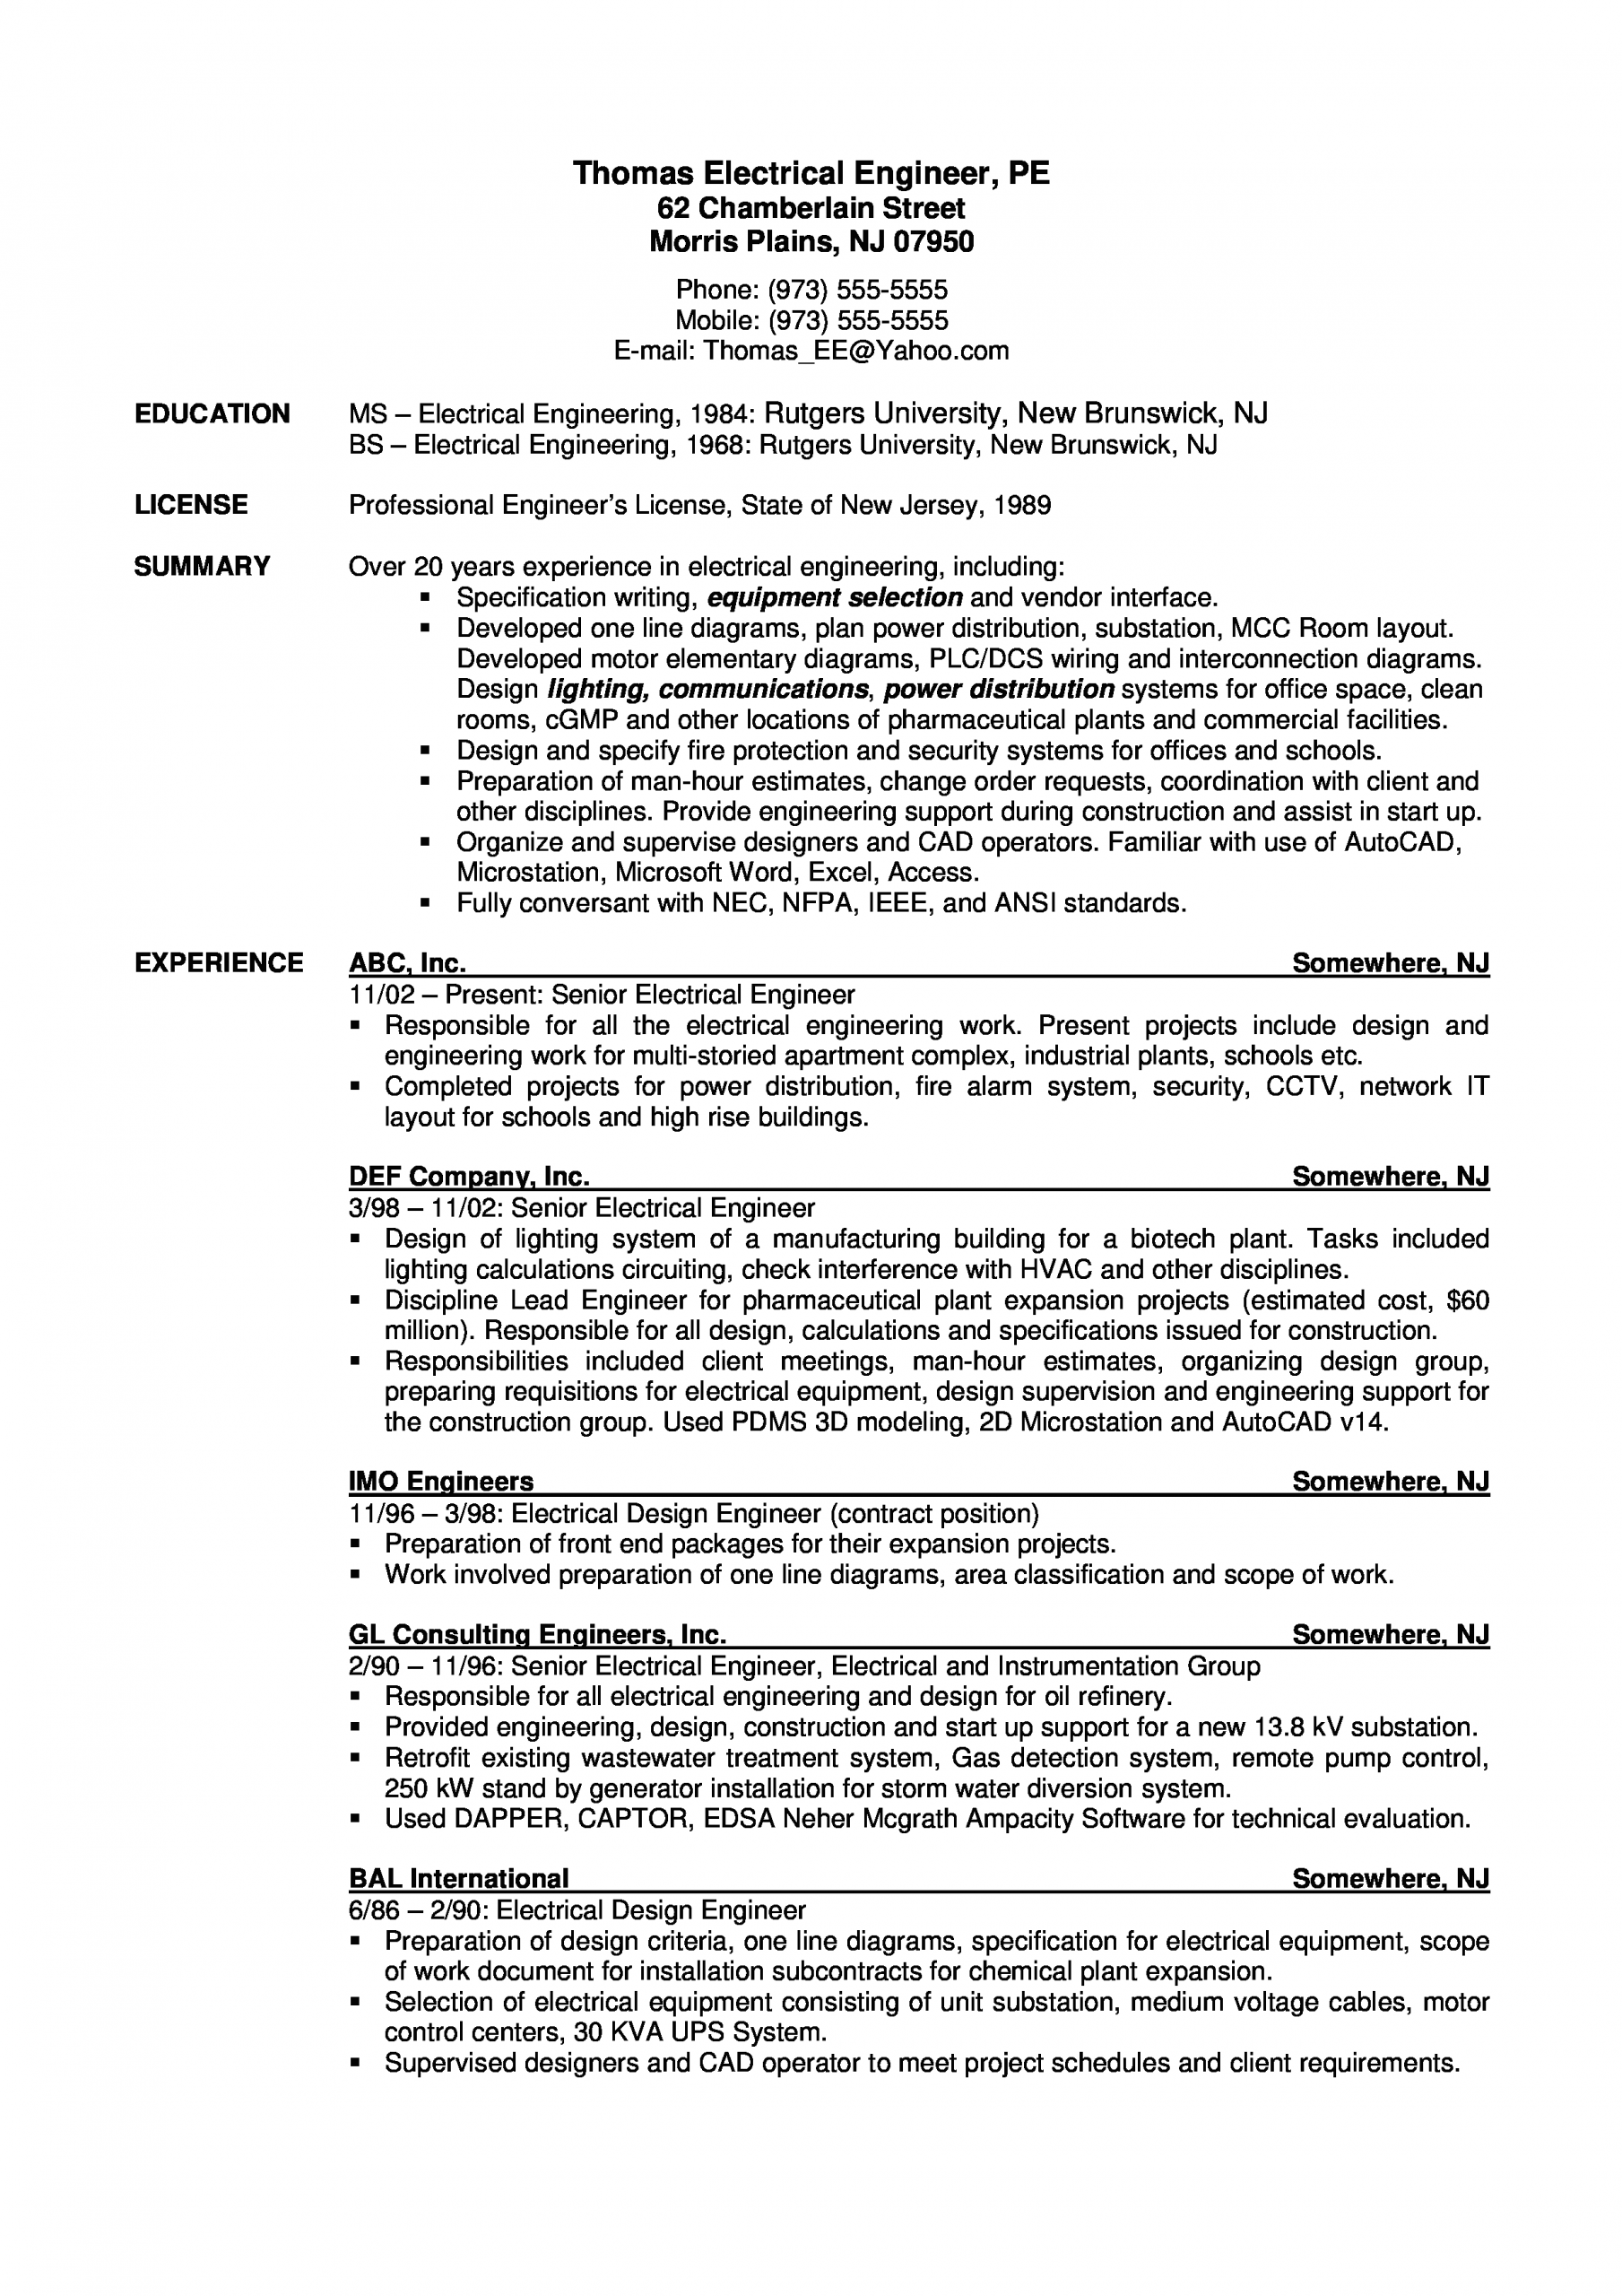 Sample Resume for Water Treatment Engineer Wastewater Treatment Engineer Resume Best Resume Examples